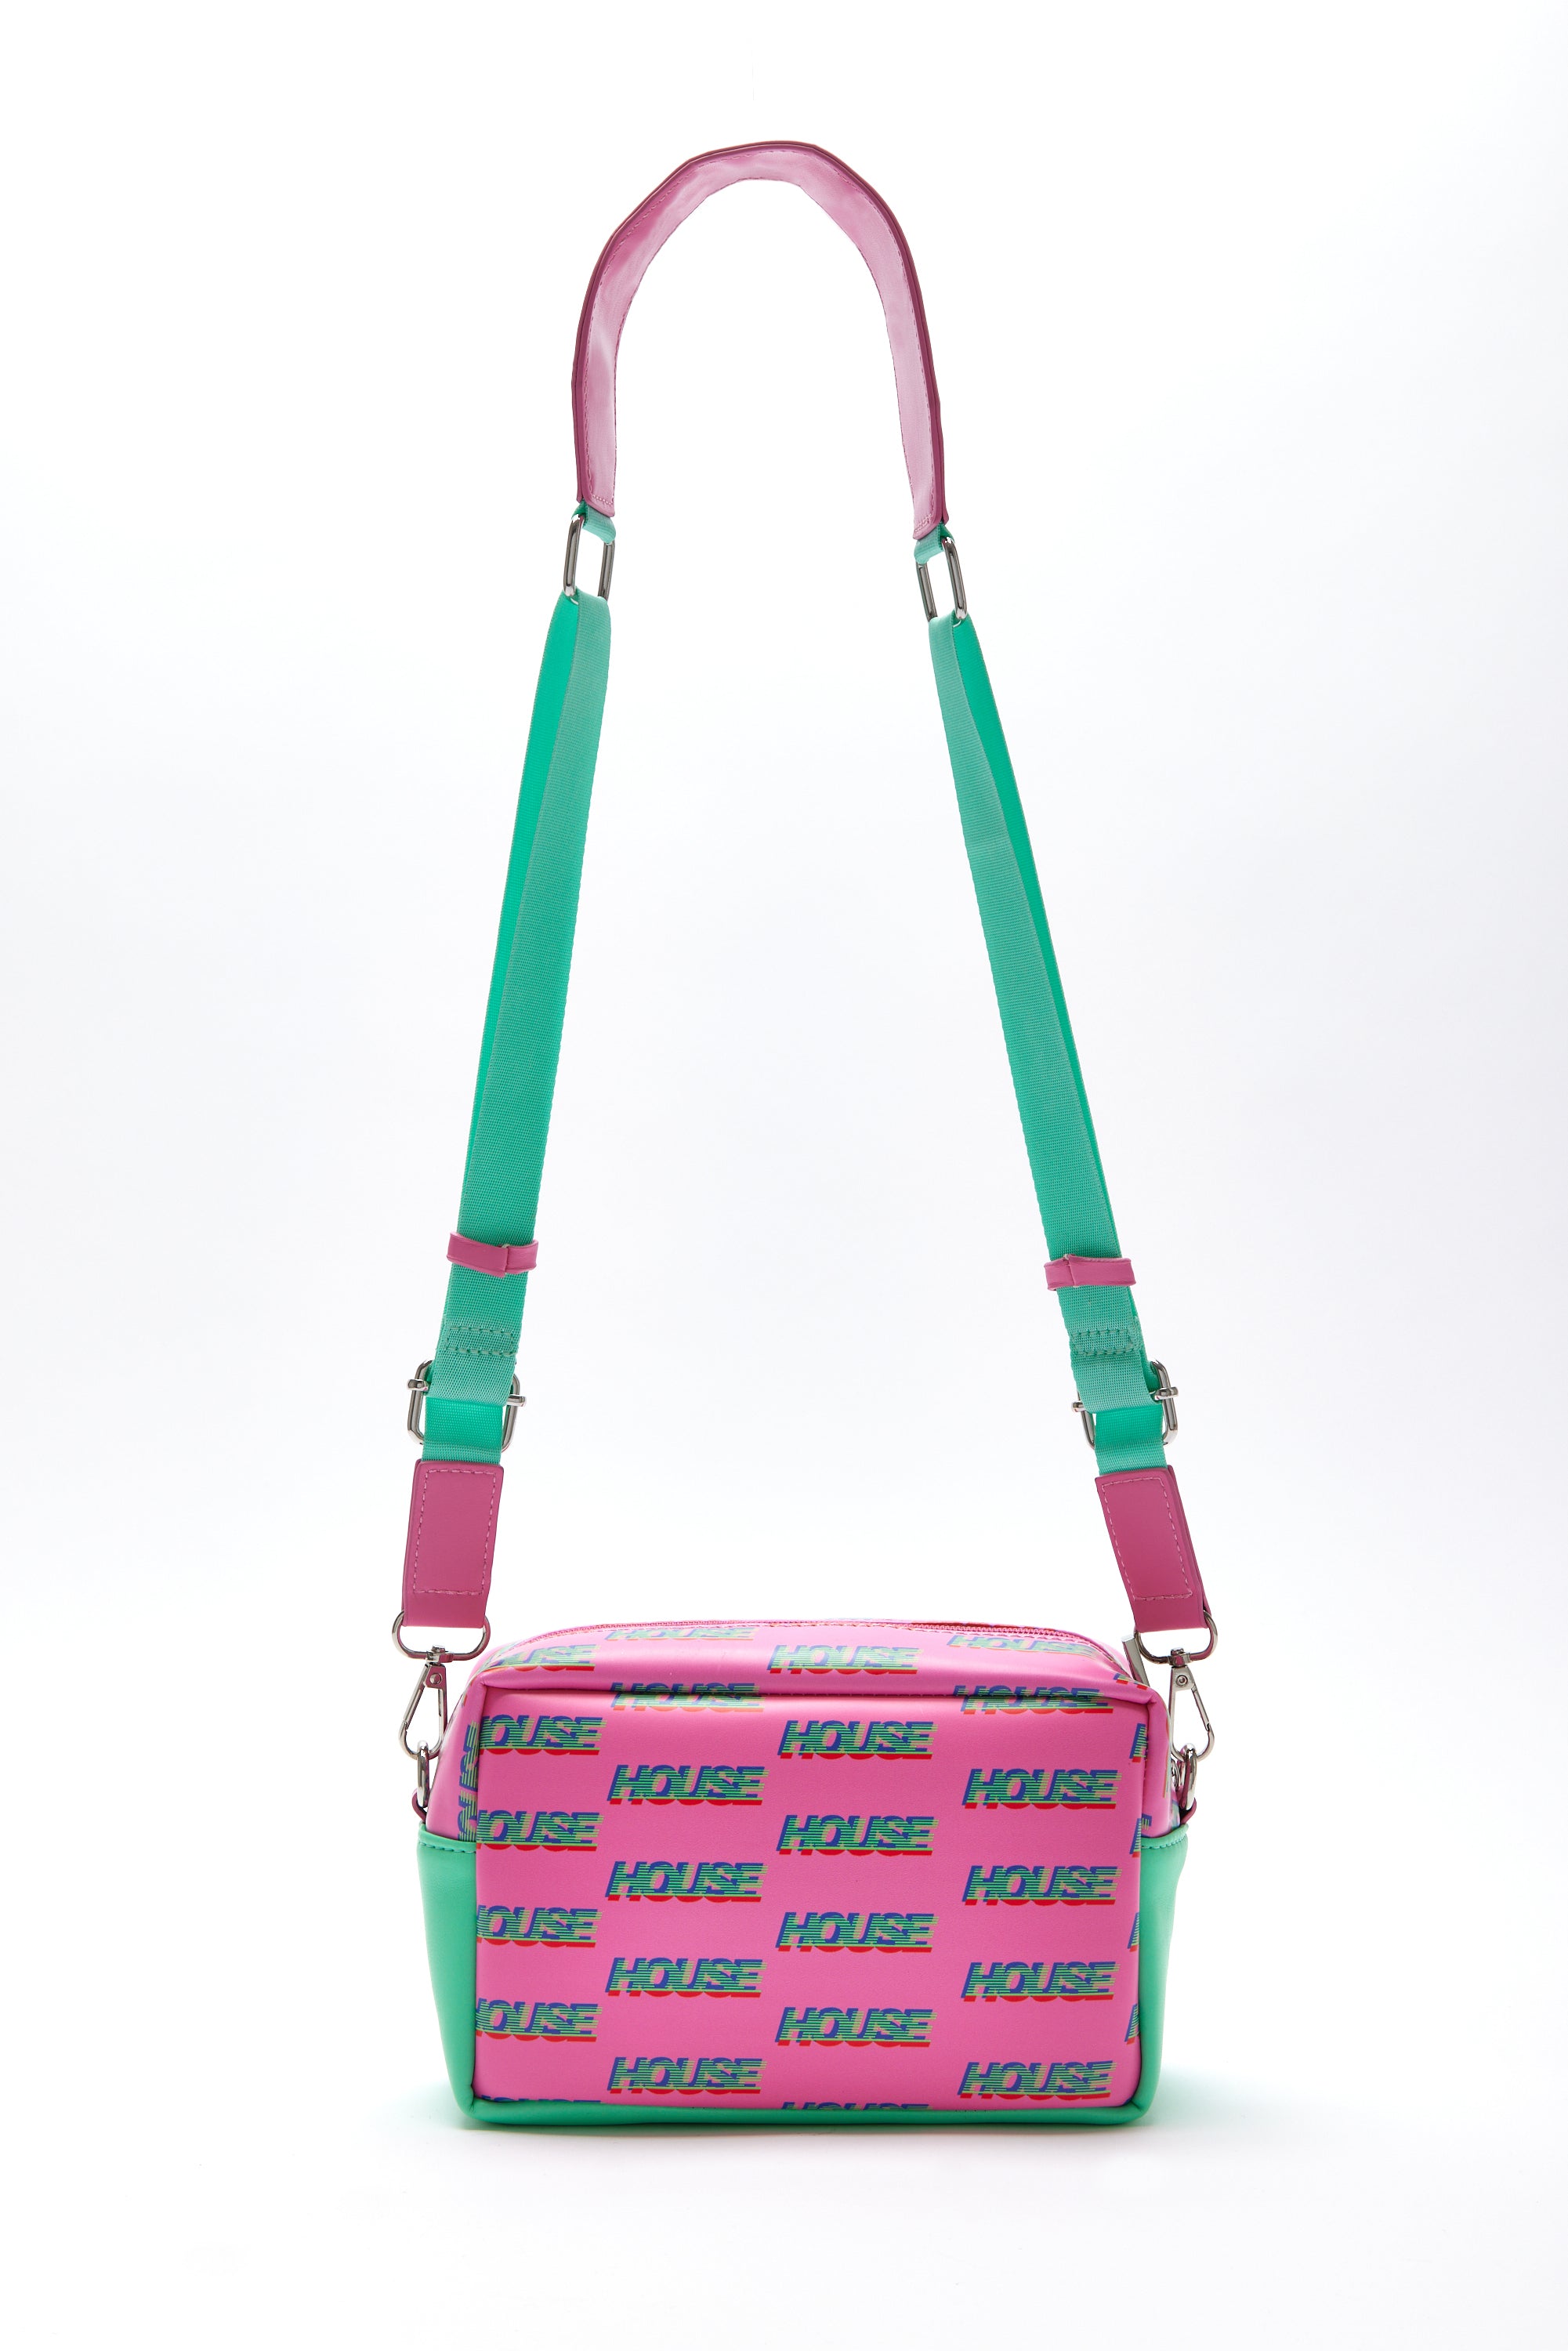 House Of Cross Bag In Pink And Mint With 'House' Print – House of Holland®